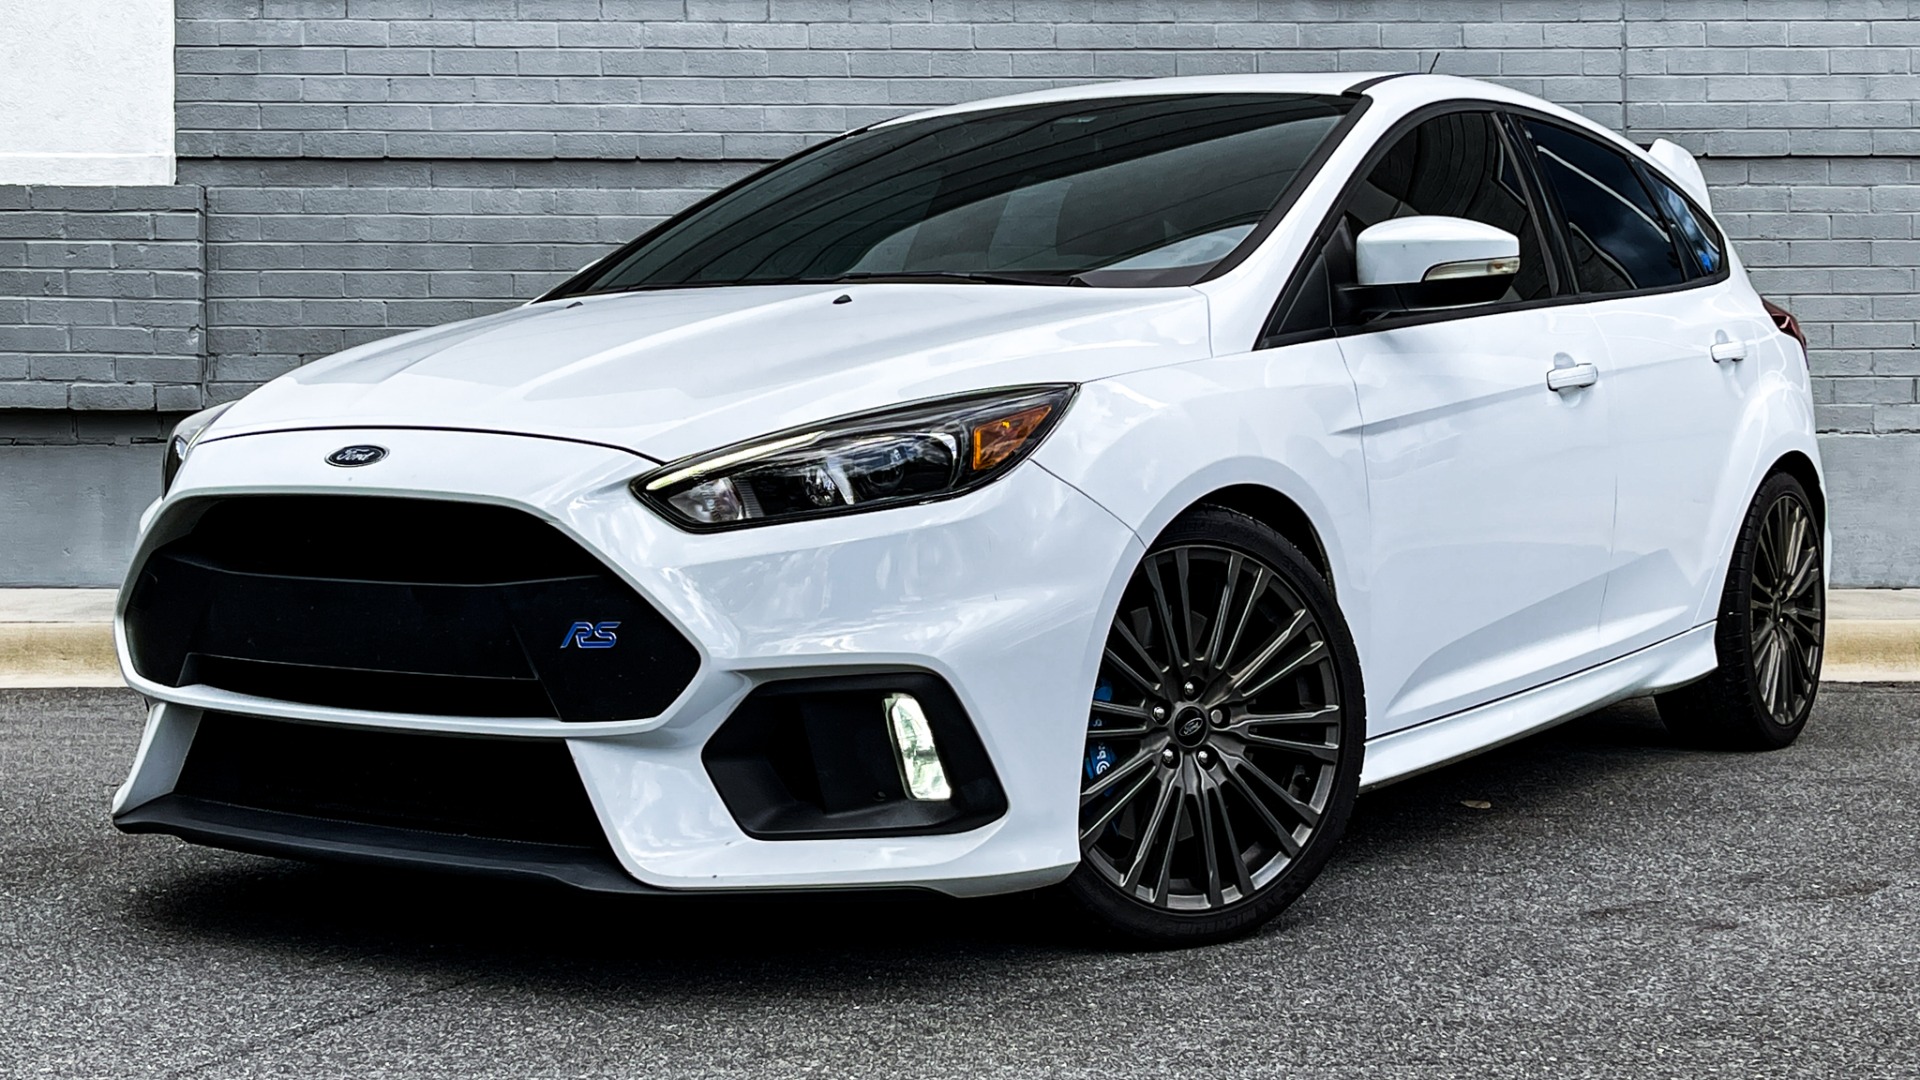 Used 2017 Ford Focus RS / SUNROOF / RS2 PACKAGE / RECAROS / MBRP EXHAUST / ALL WHEEL DRIVE for sale Sold at Formula Imports in Charlotte NC 28227 1